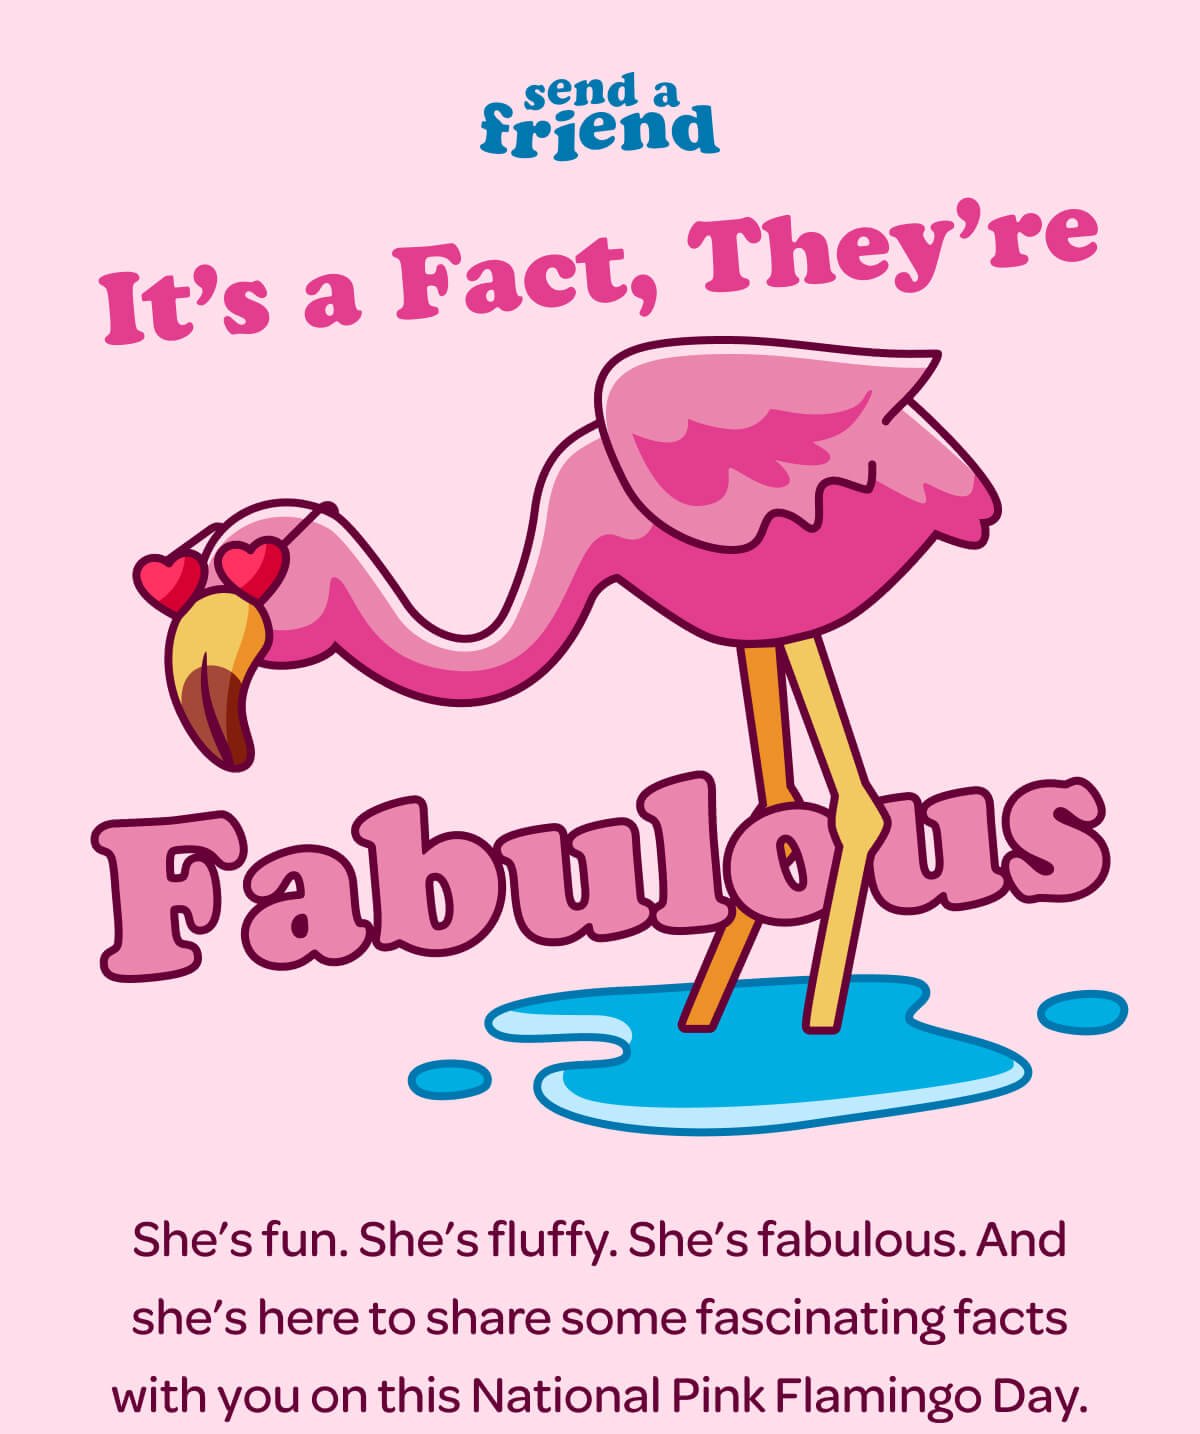 It's a Fact, They're Fabulous. She’s fun. She’s fluffy. She’s fabulous. And she’s here to share some fascinating facts with you on this National Pink Flamingo Day.